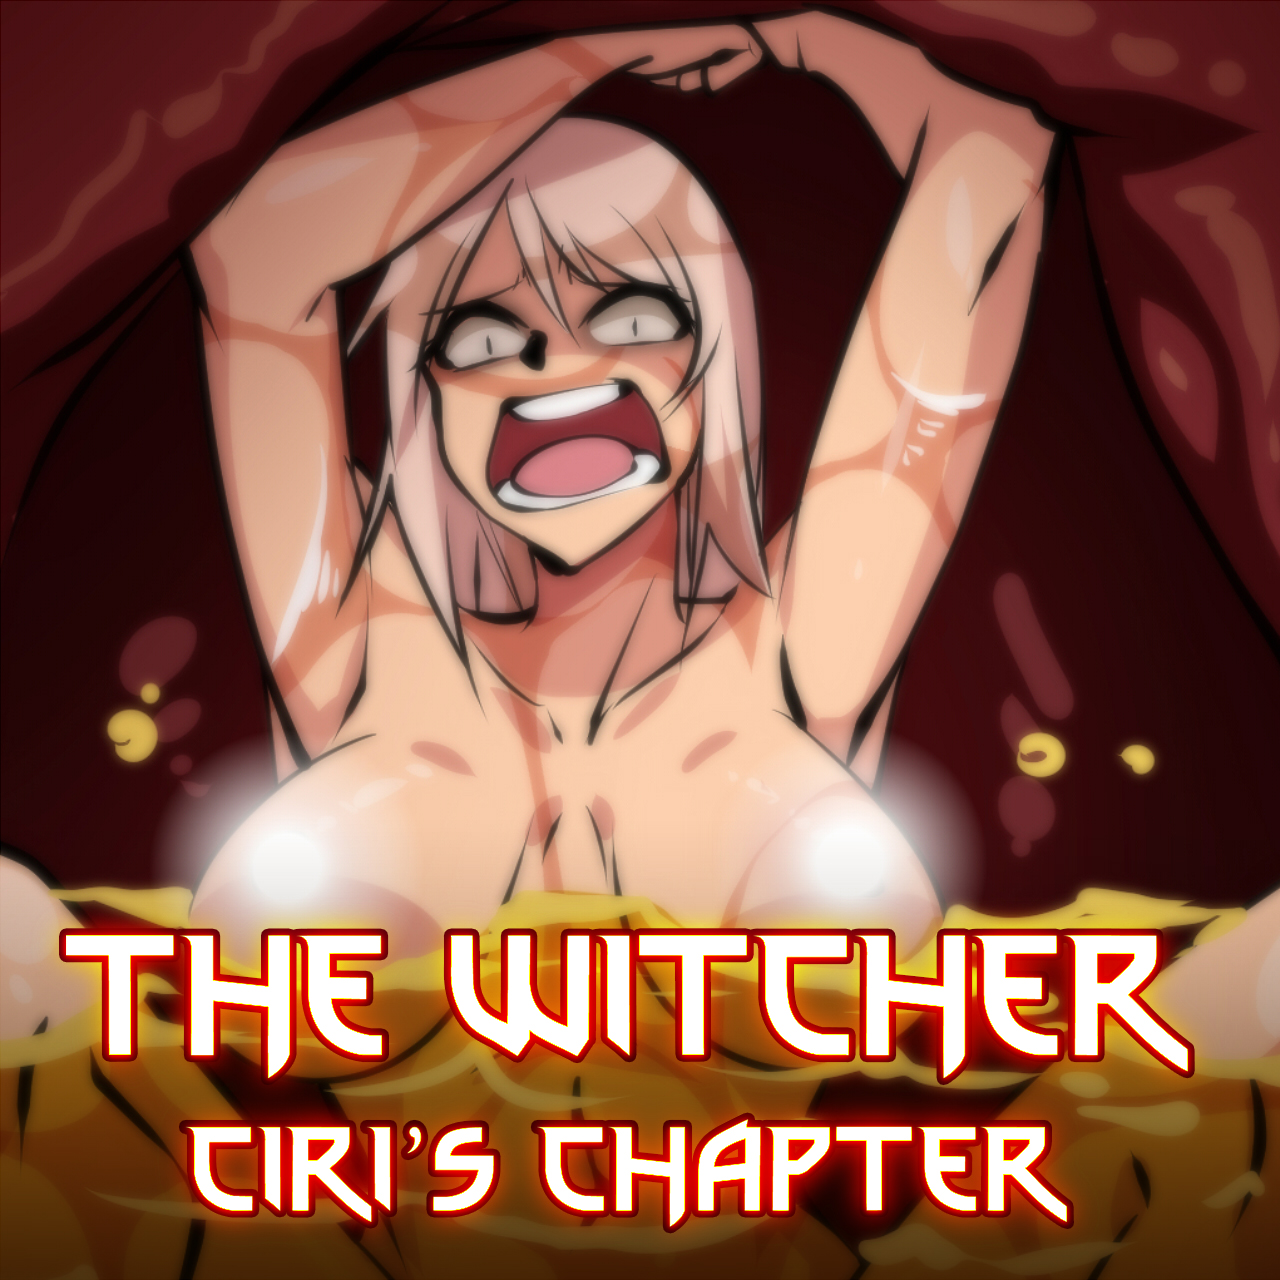 The Witcher: Ciri's Chapter